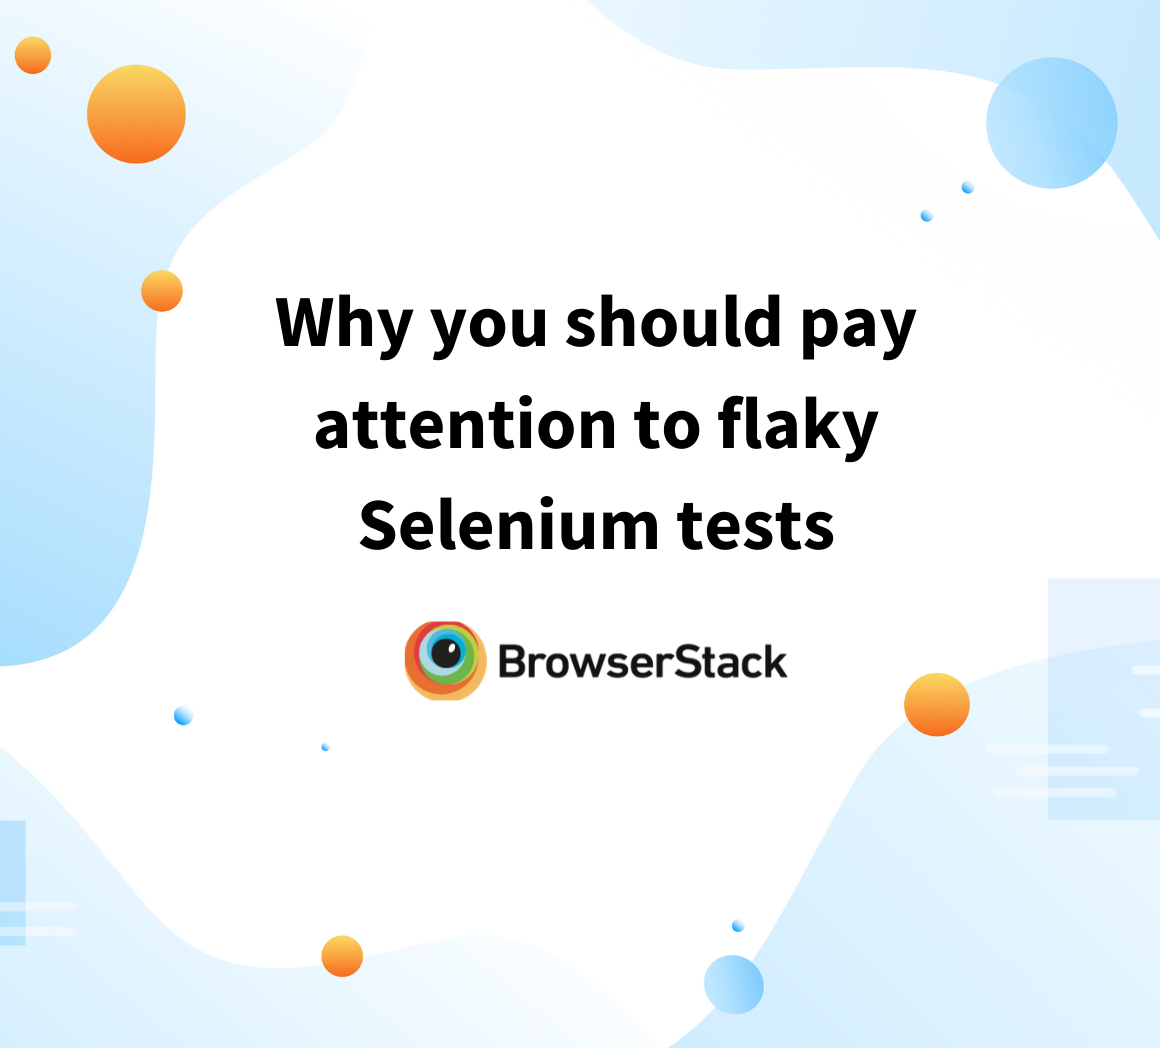 Why you should pay attention to flaky Selenium tests